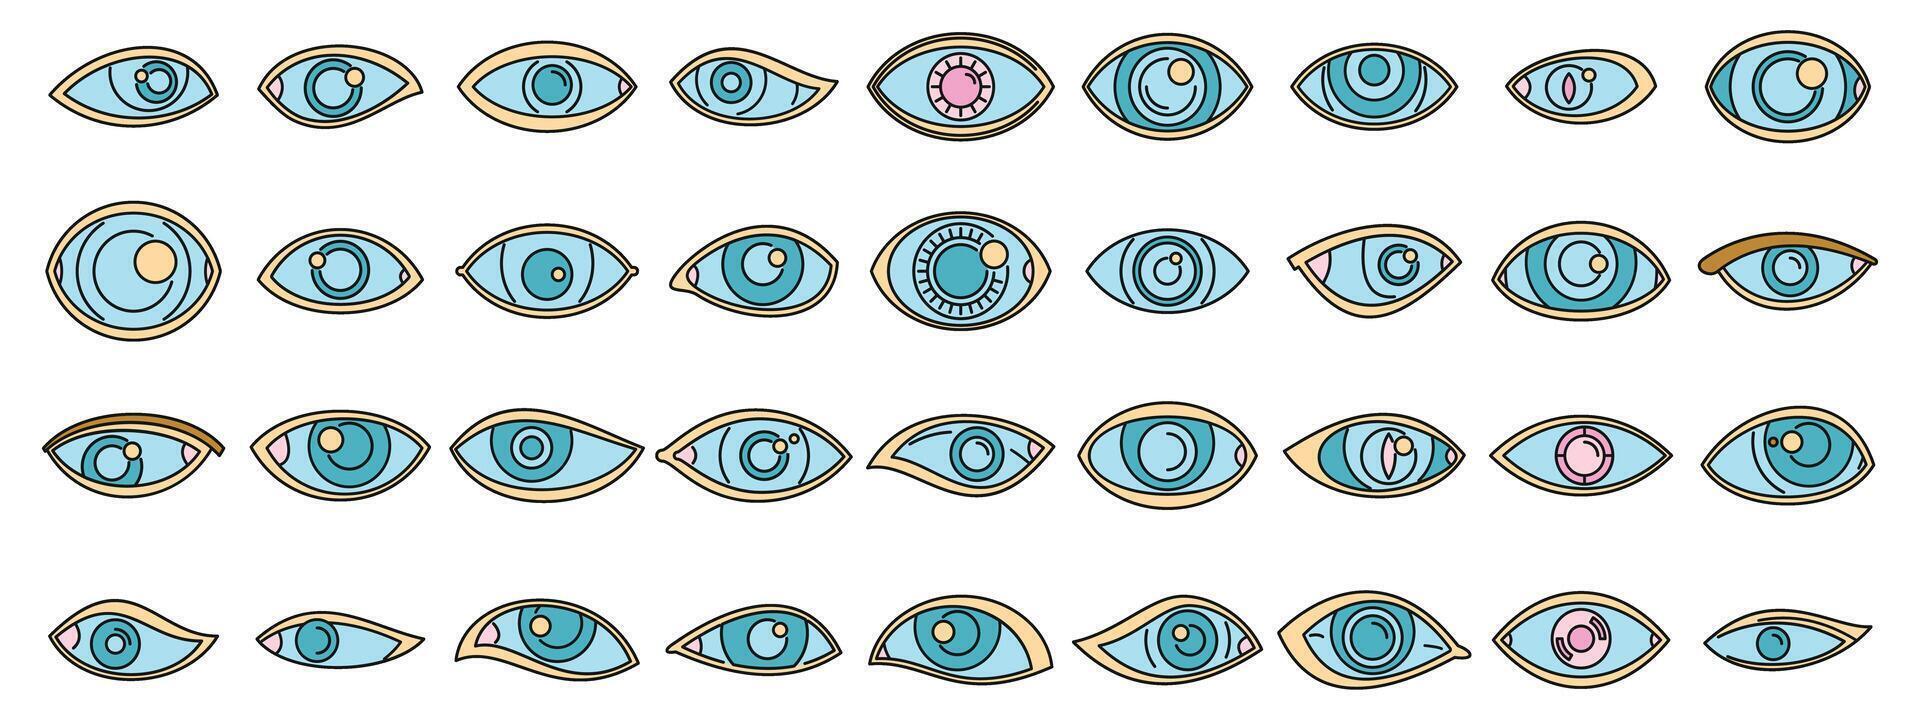 Eyes icons set vector color